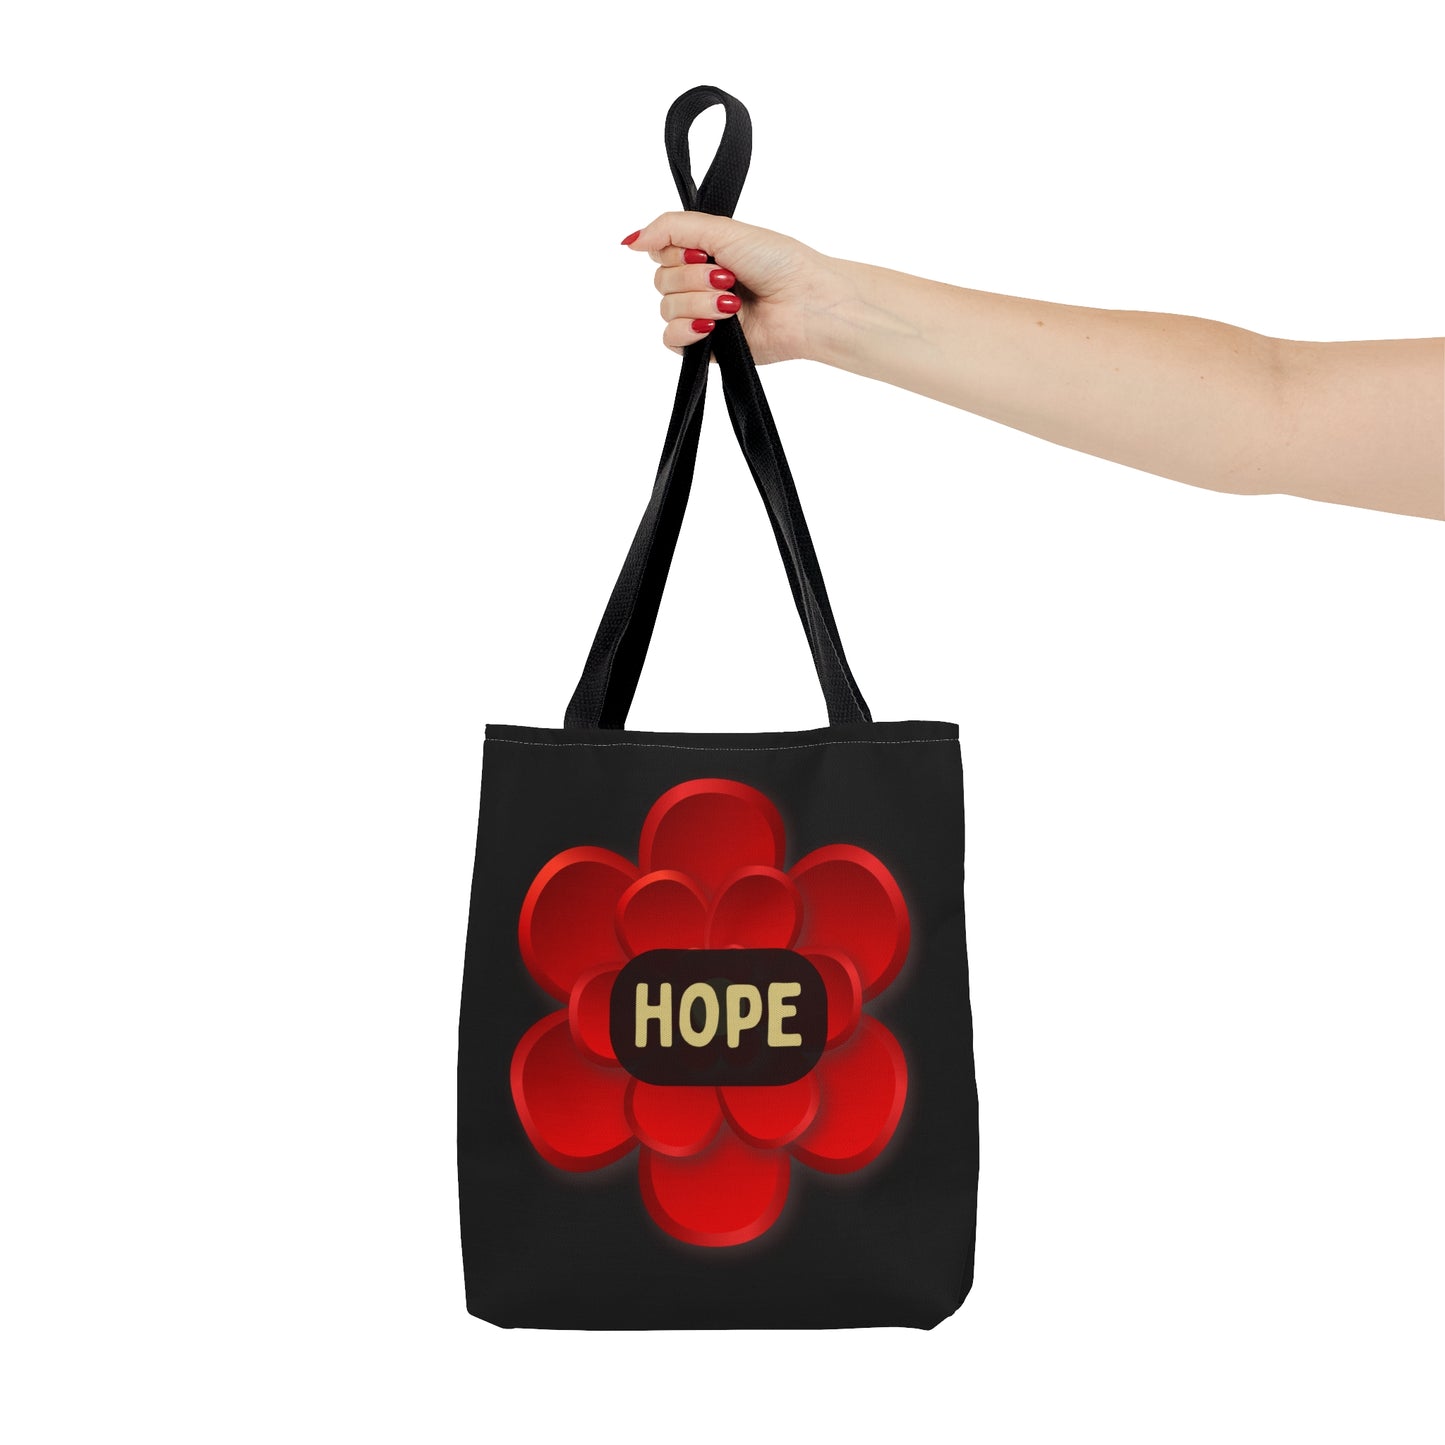 Vibrant “Hope" Tote Bag in 3 sizes to meet your needs.